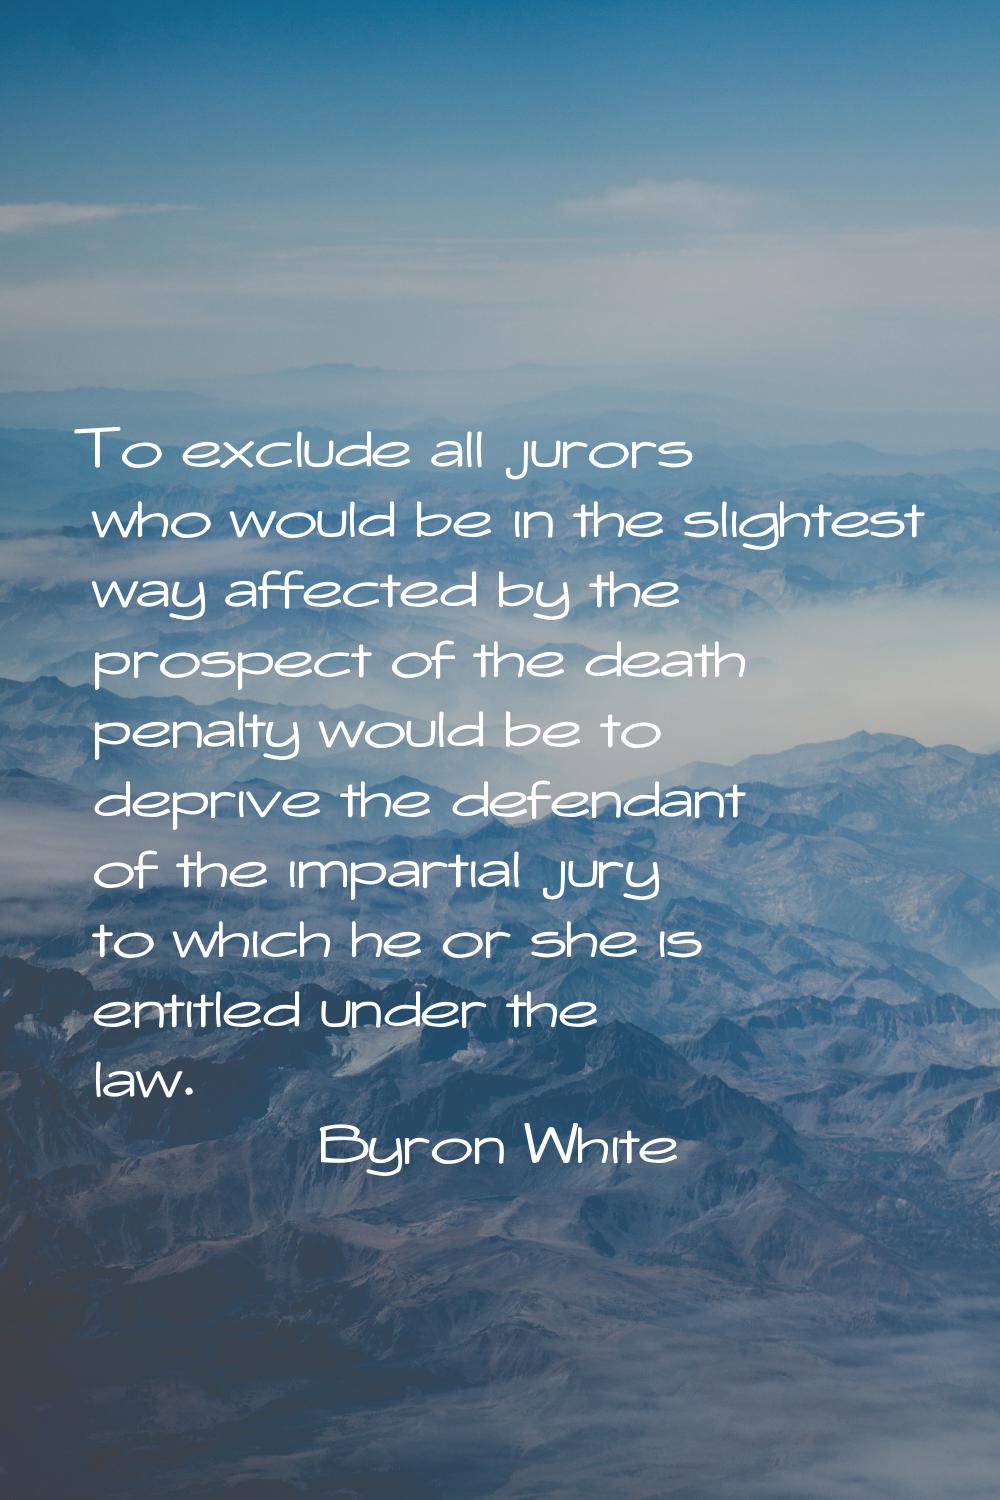 To exclude all jurors who would be in the slightest way affected by the prospect of the death penal